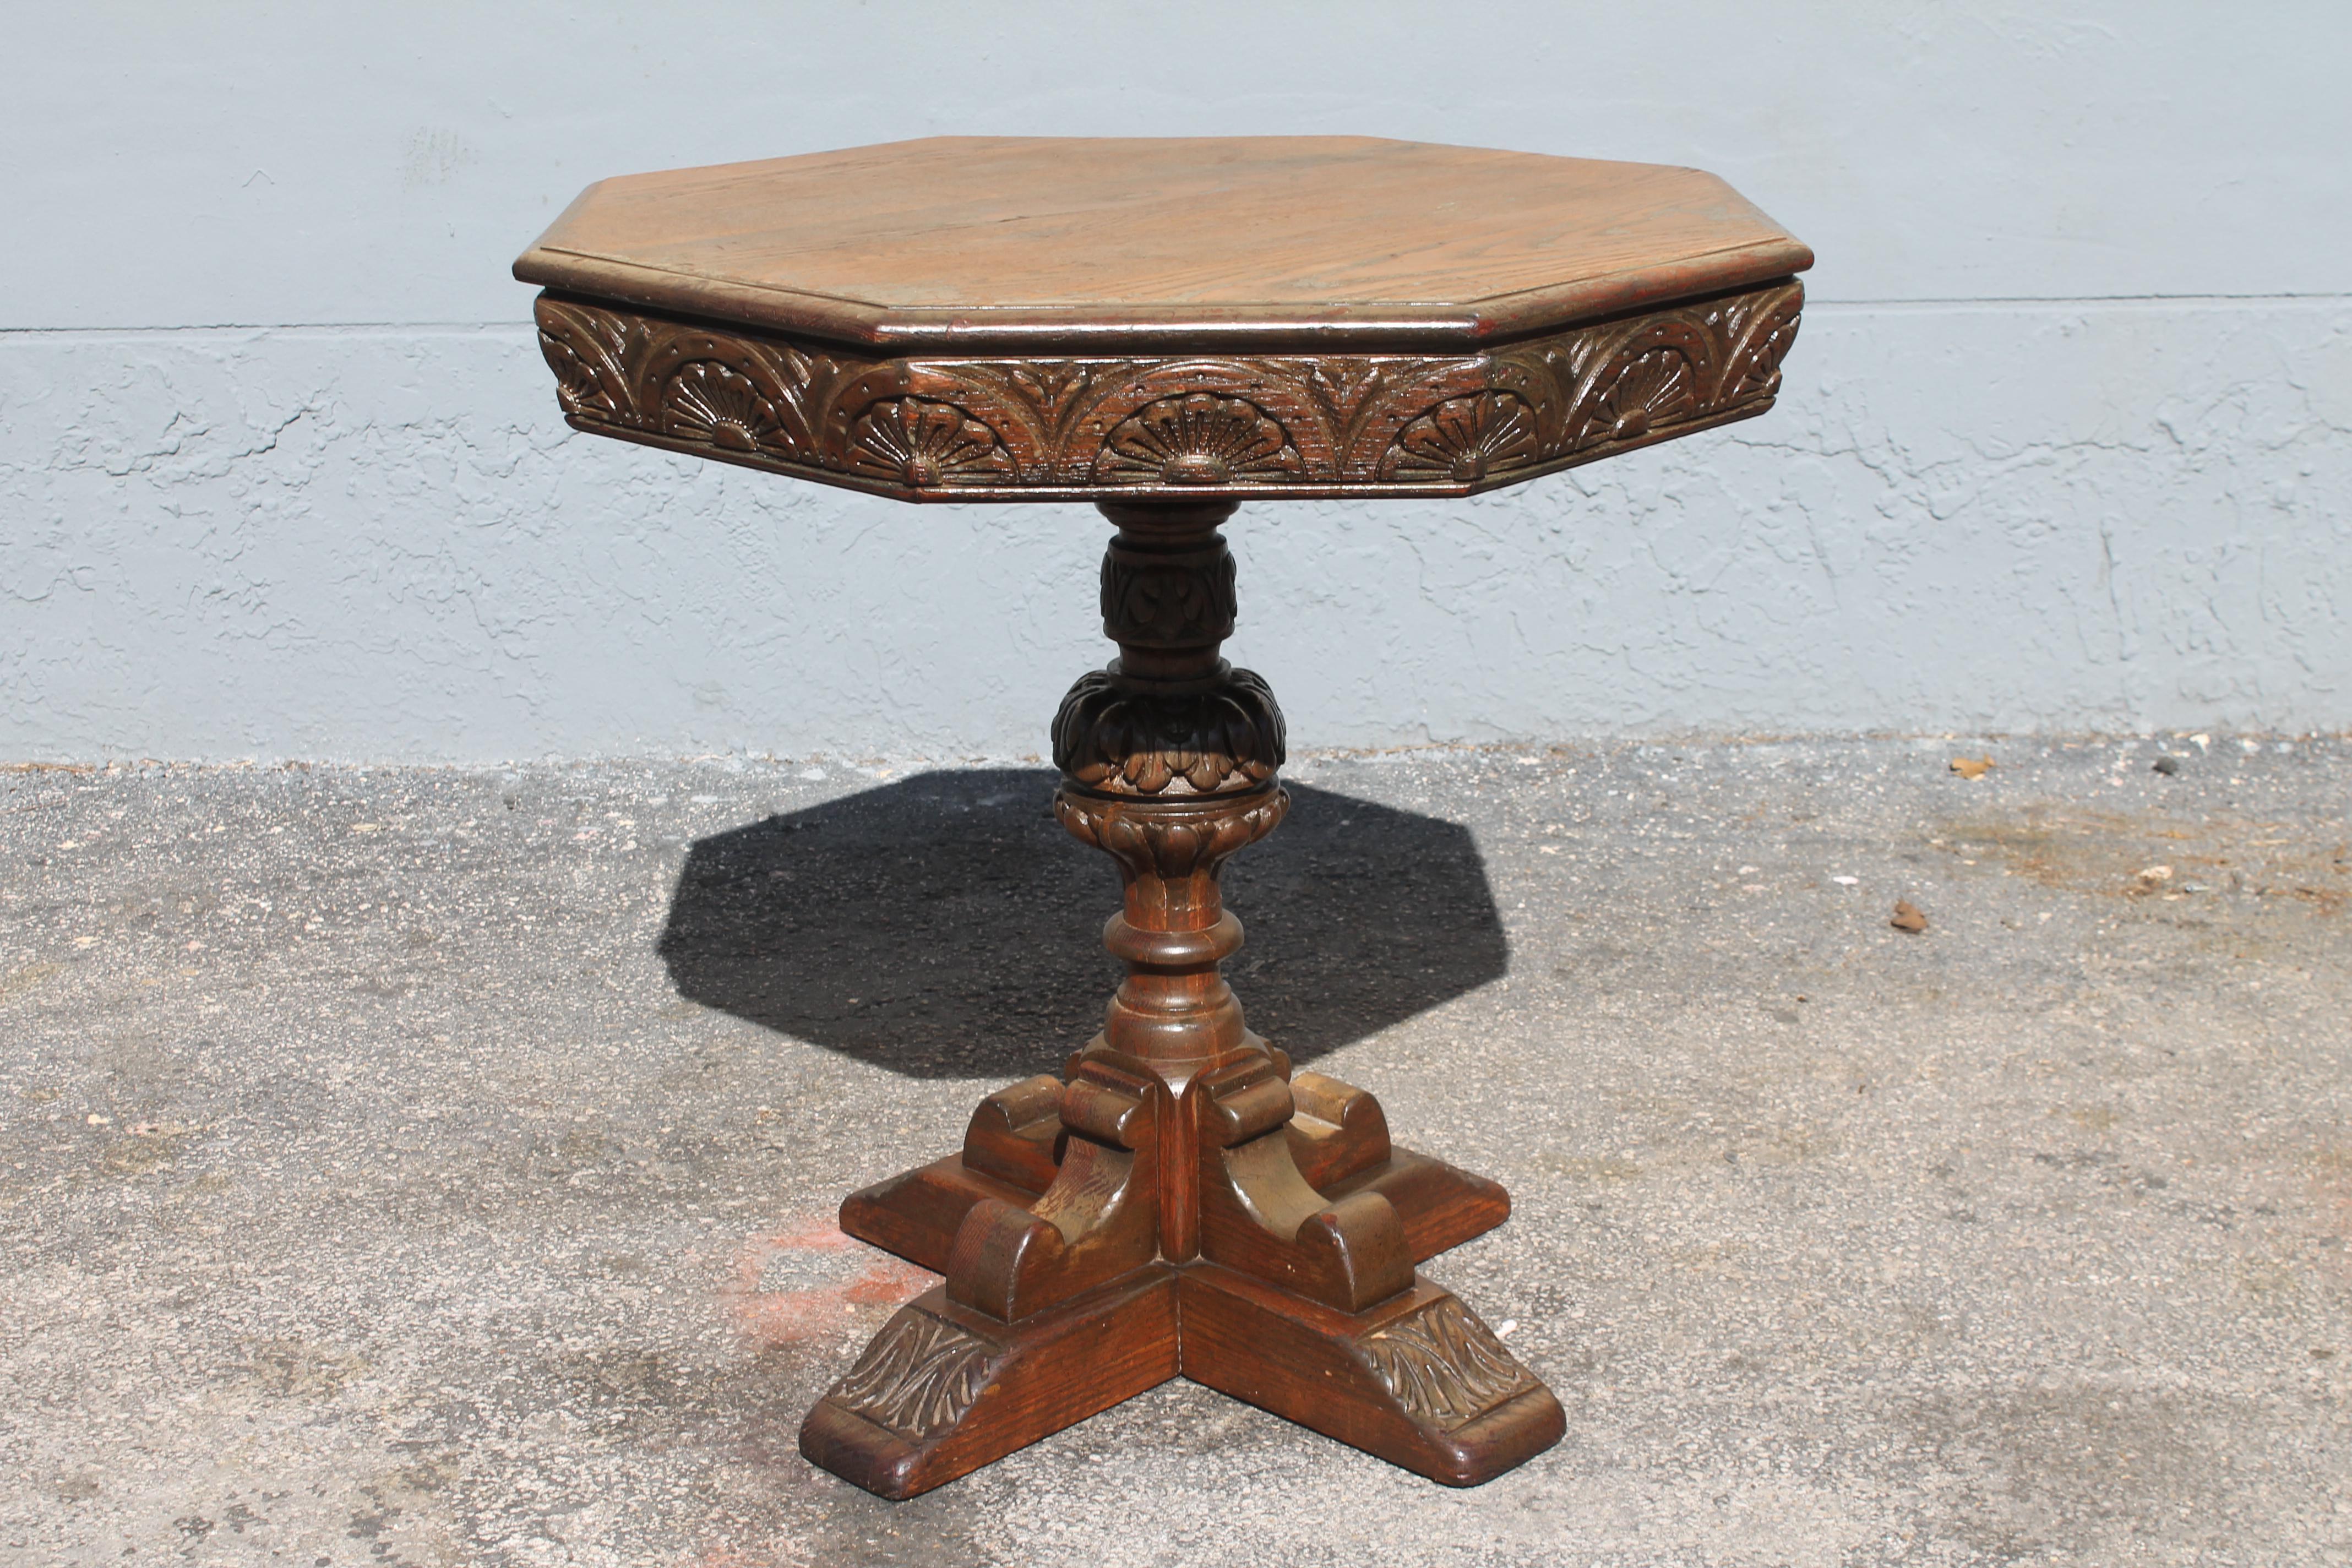 19thc French Rennaisance Revival Carved Center Table + Pair Chairs  Set of 3 pcs For Sale 3